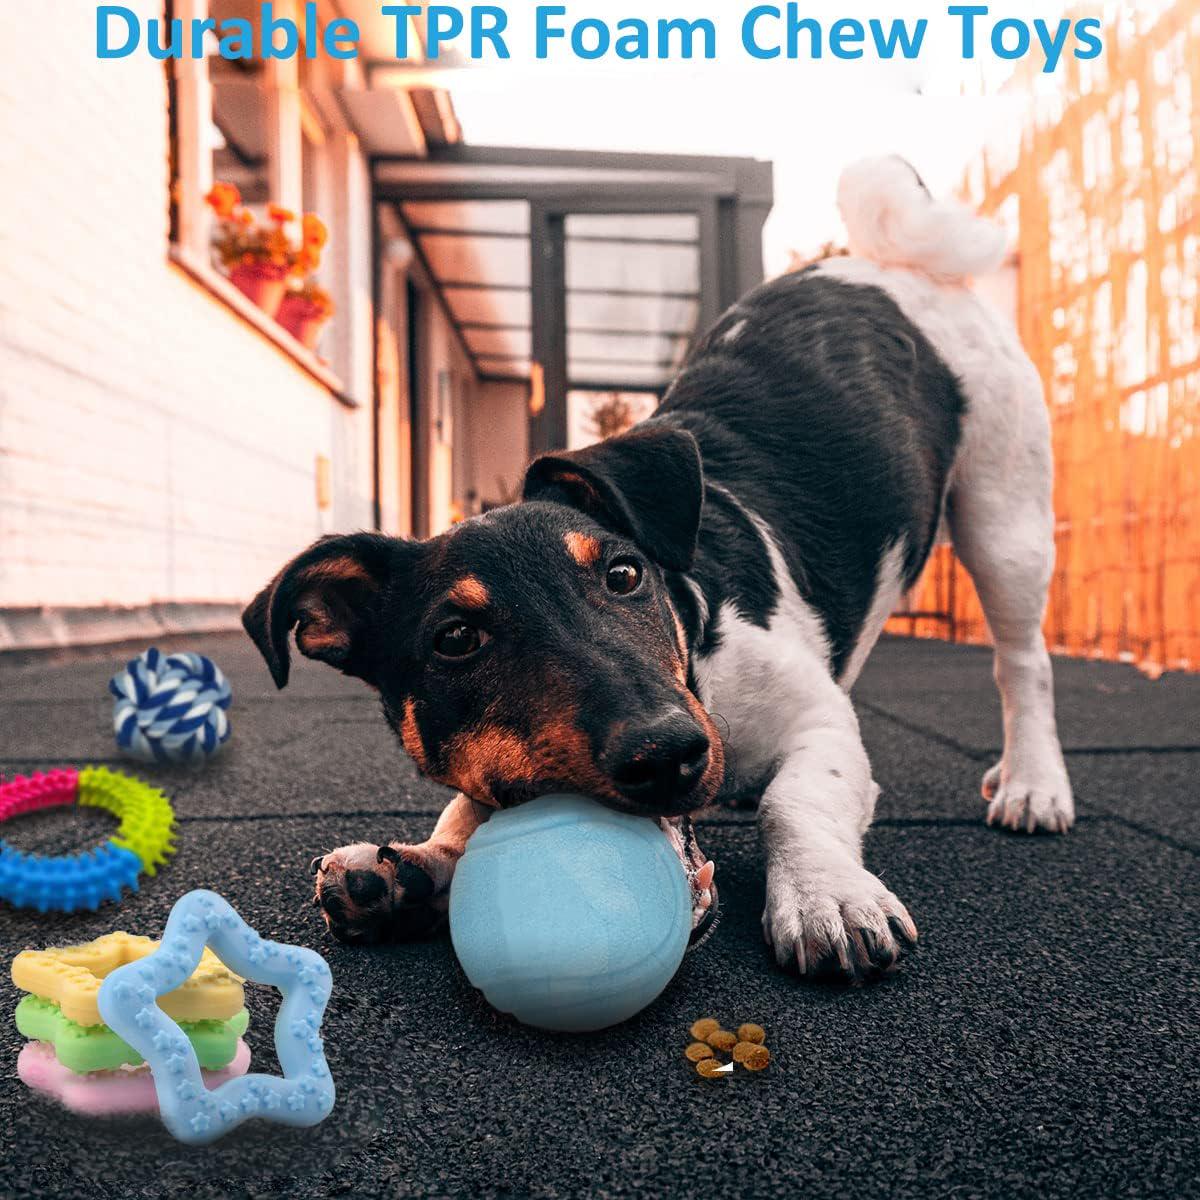 20 Pack Puppy Chew Toys - Dog Teething Toys for Puppies, Puppy Toys Toothbrush with Durable Ropes